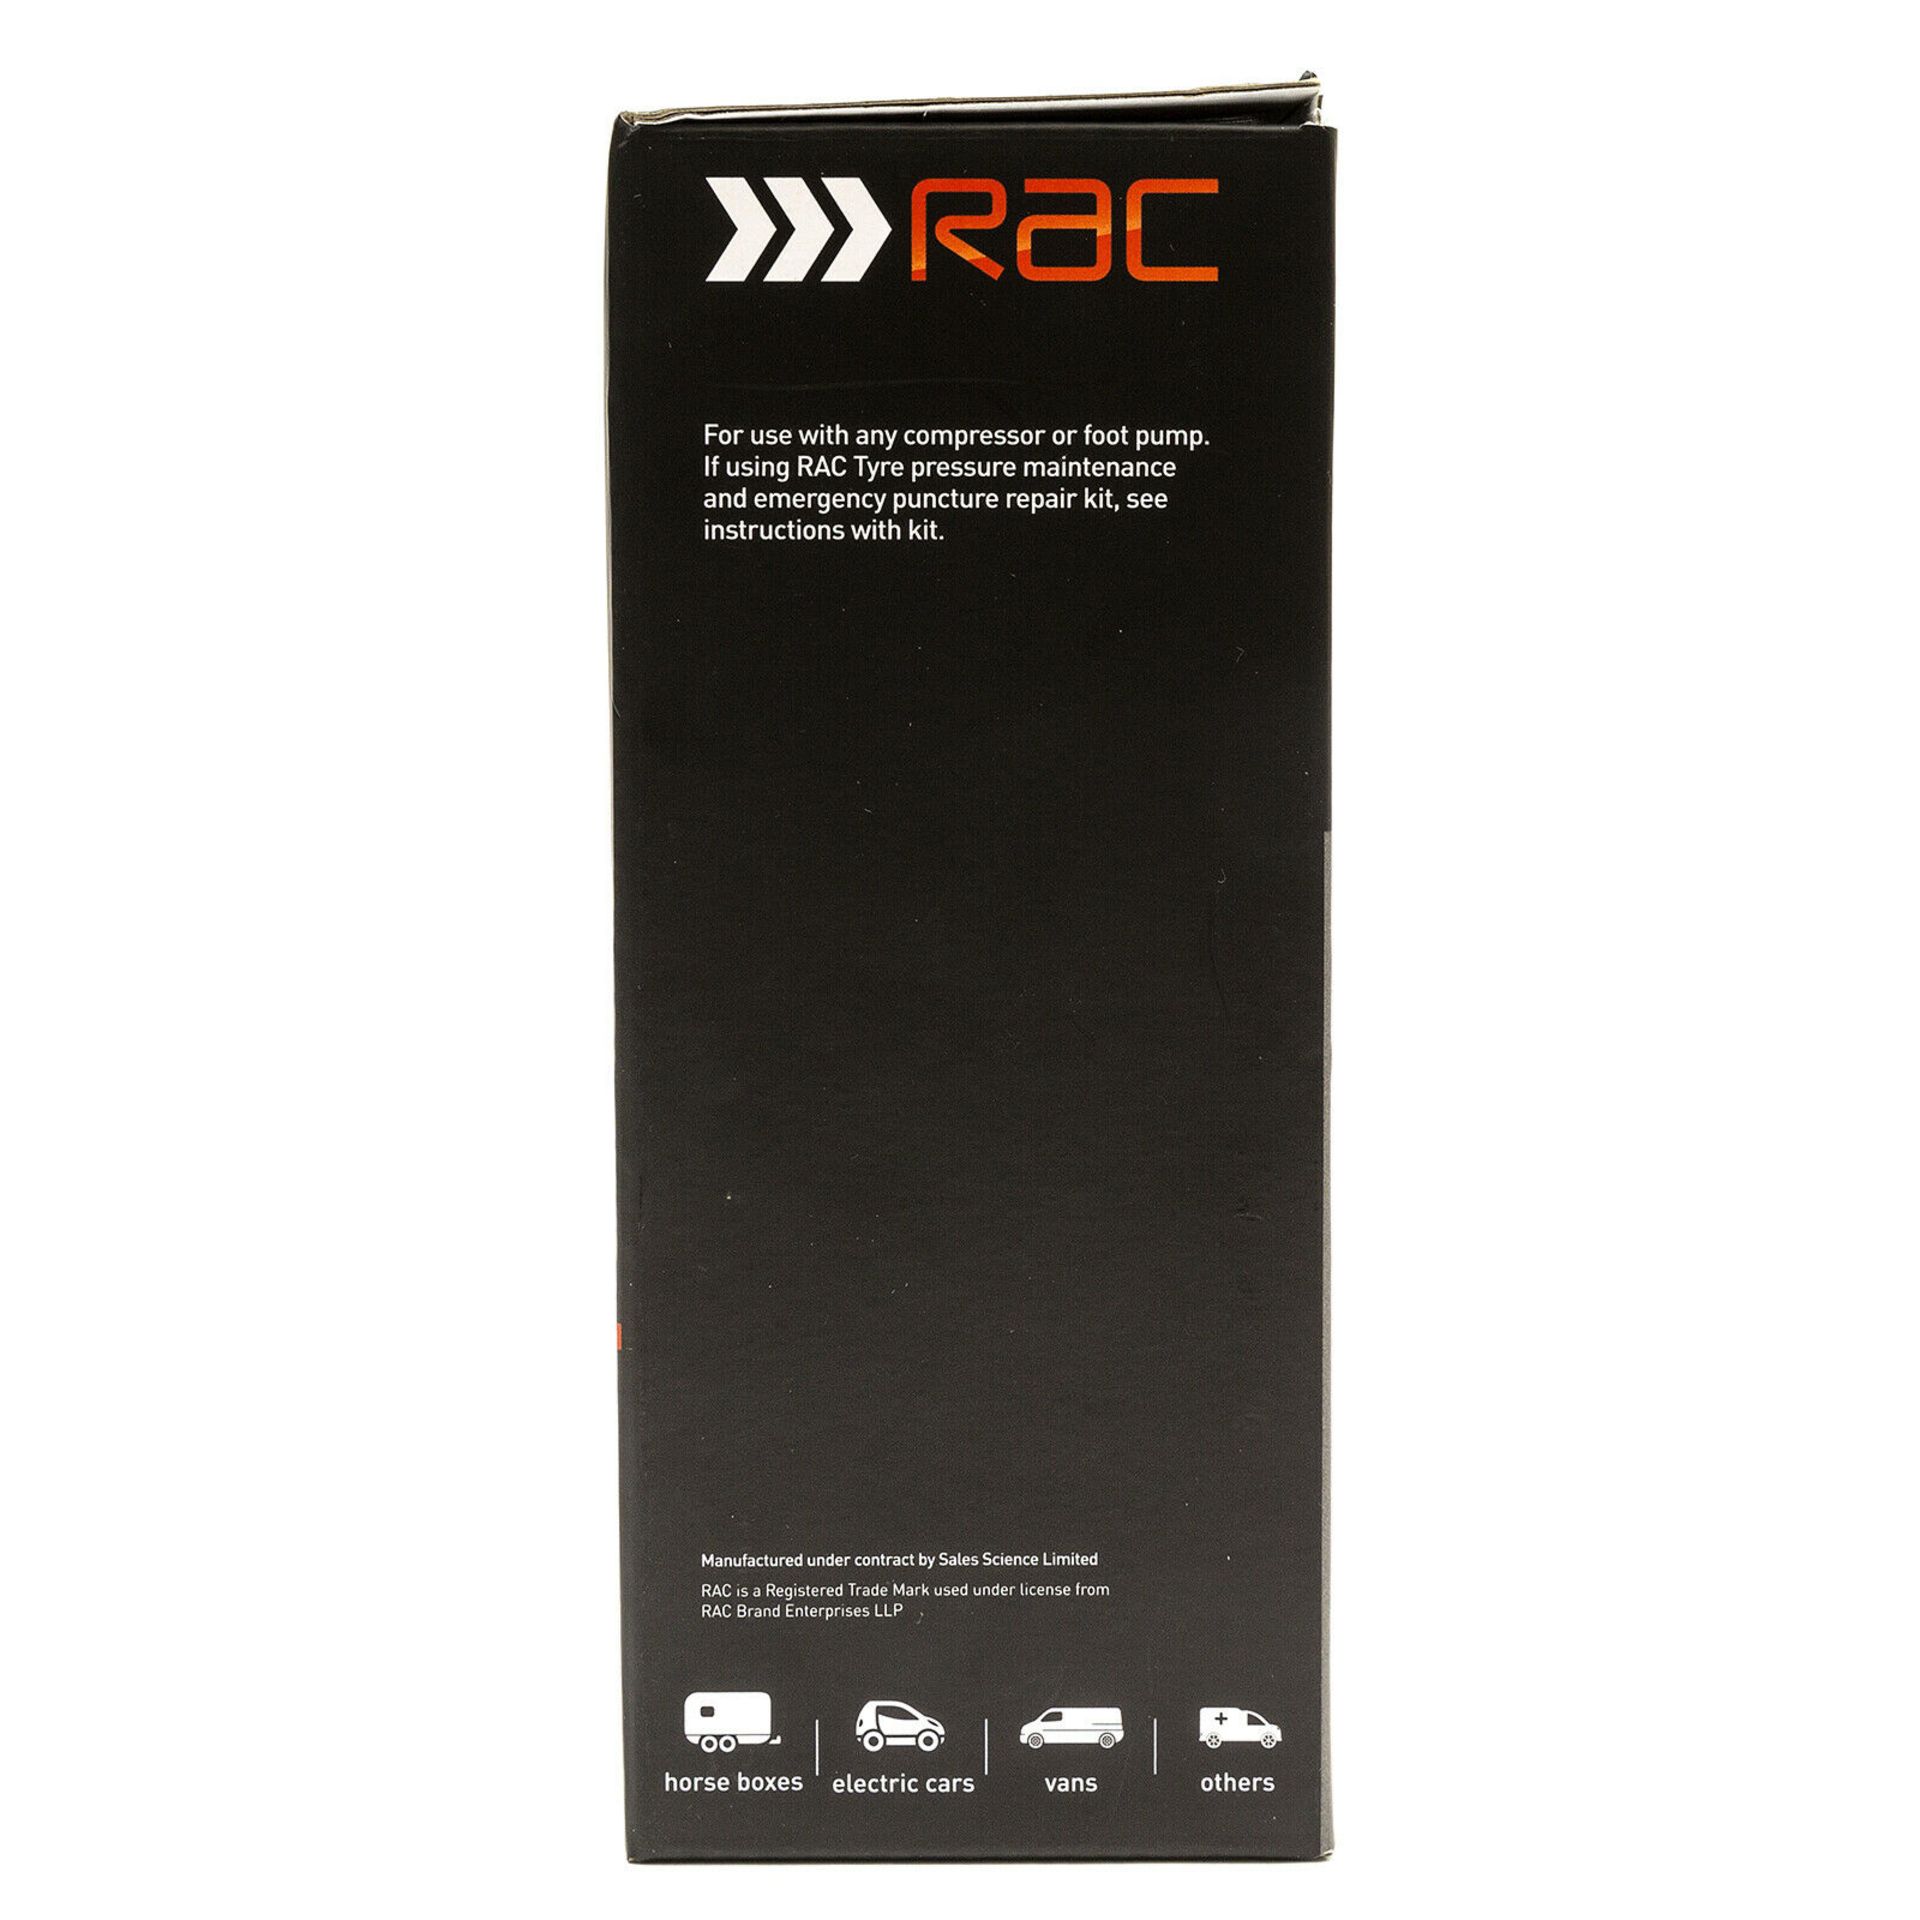 250 x RAC Emergency Tyre Sealant Puncture Repair Kits - New Boxed Resale Stock - Approx RRP £2,500! - Image 2 of 8